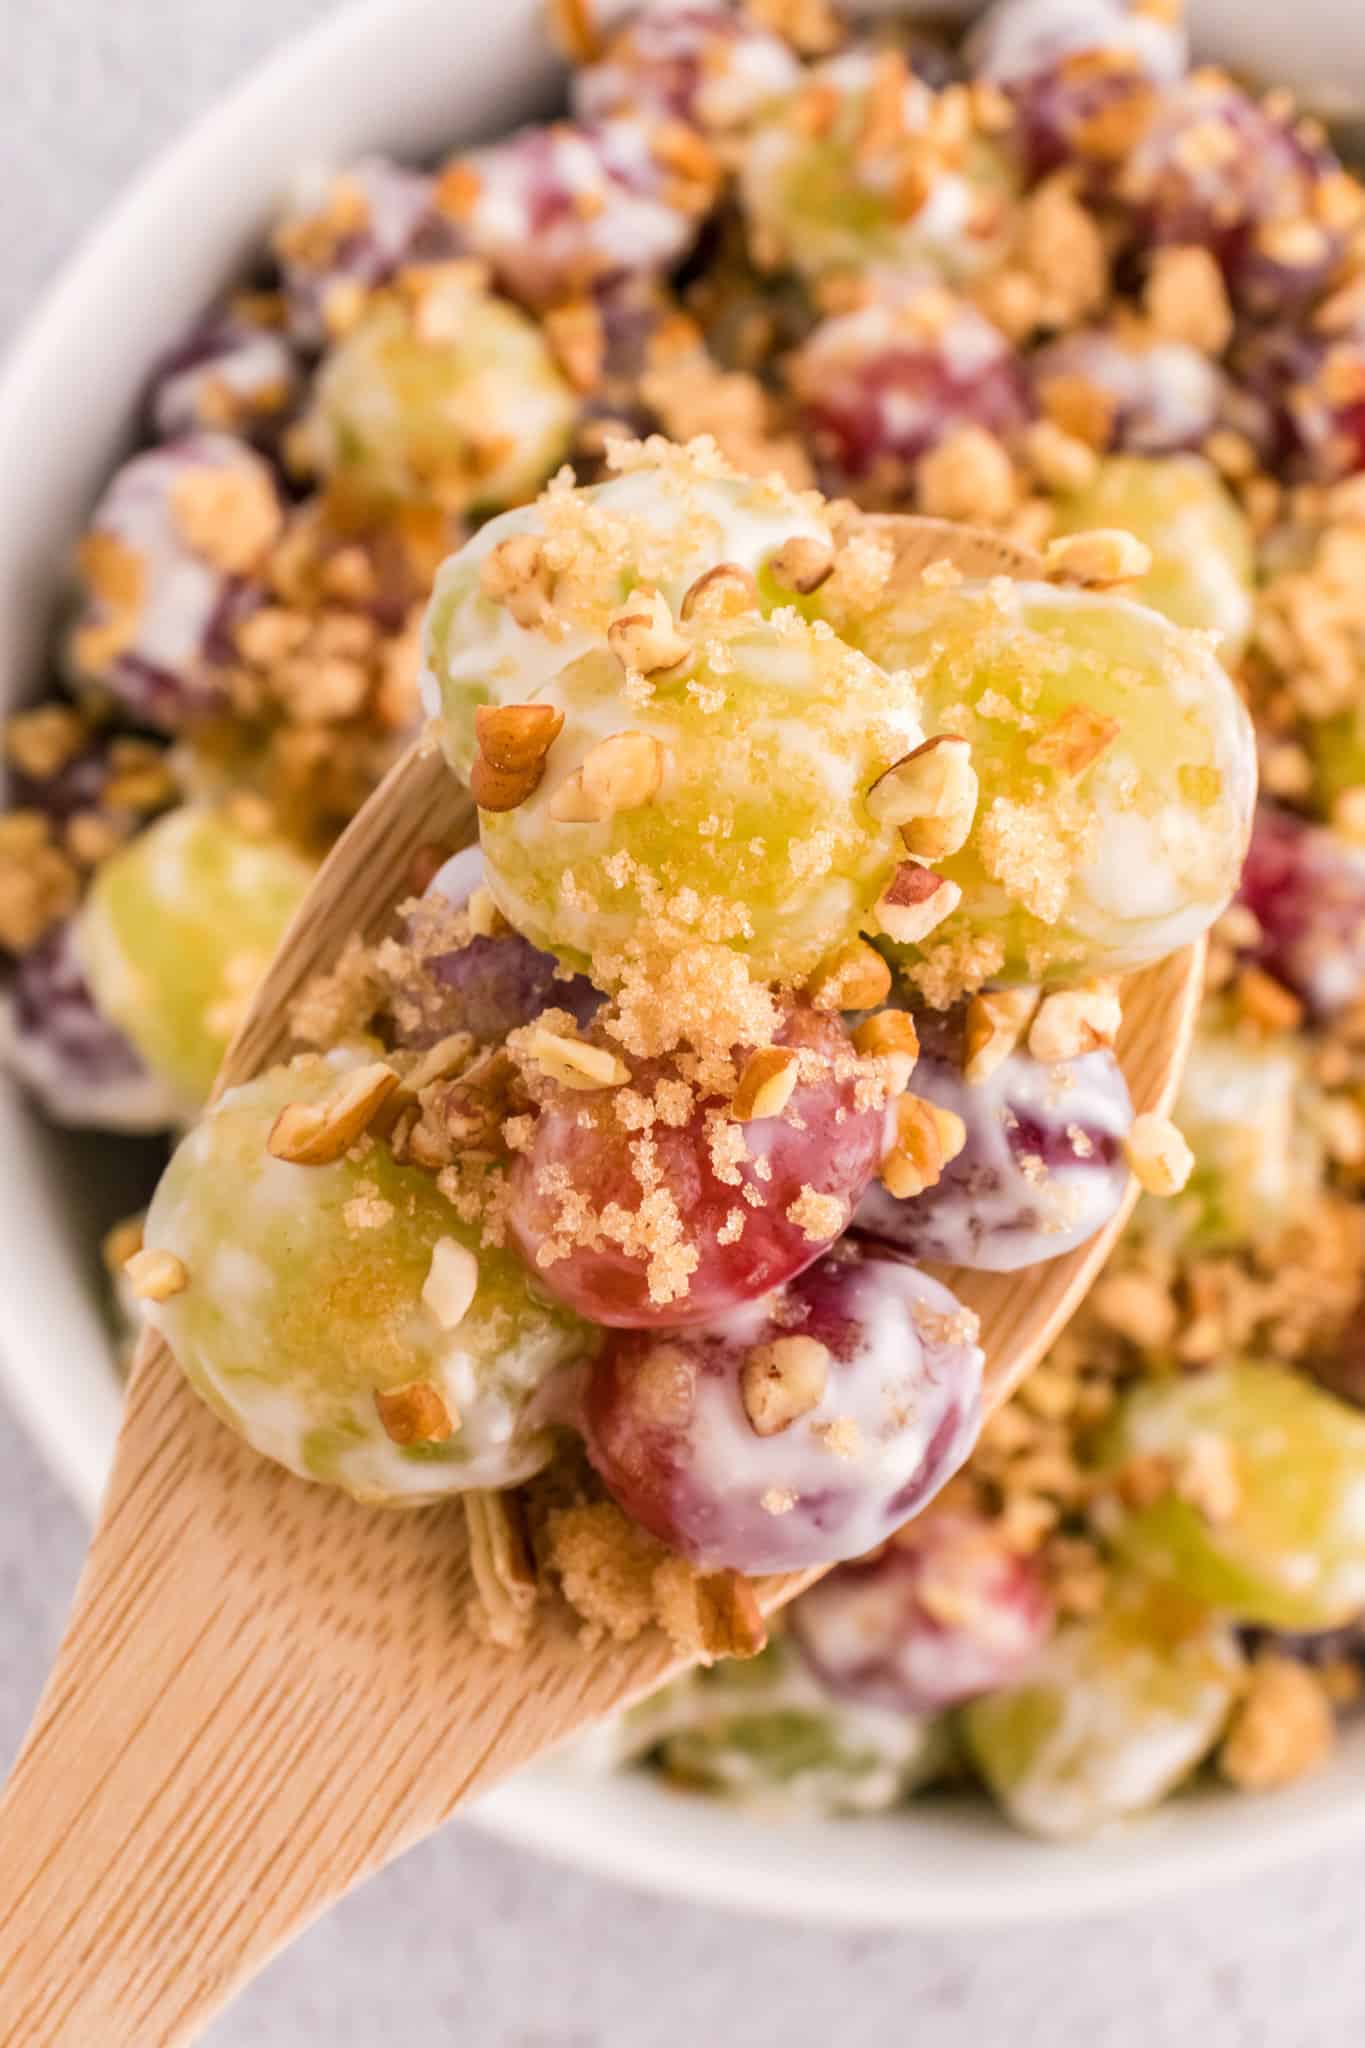 Grape Salad is a tasty side dish loaded with red and green grapes all tossed in a cream cheese and yogurt mixture and topped with brown sugar and chopped pecans.